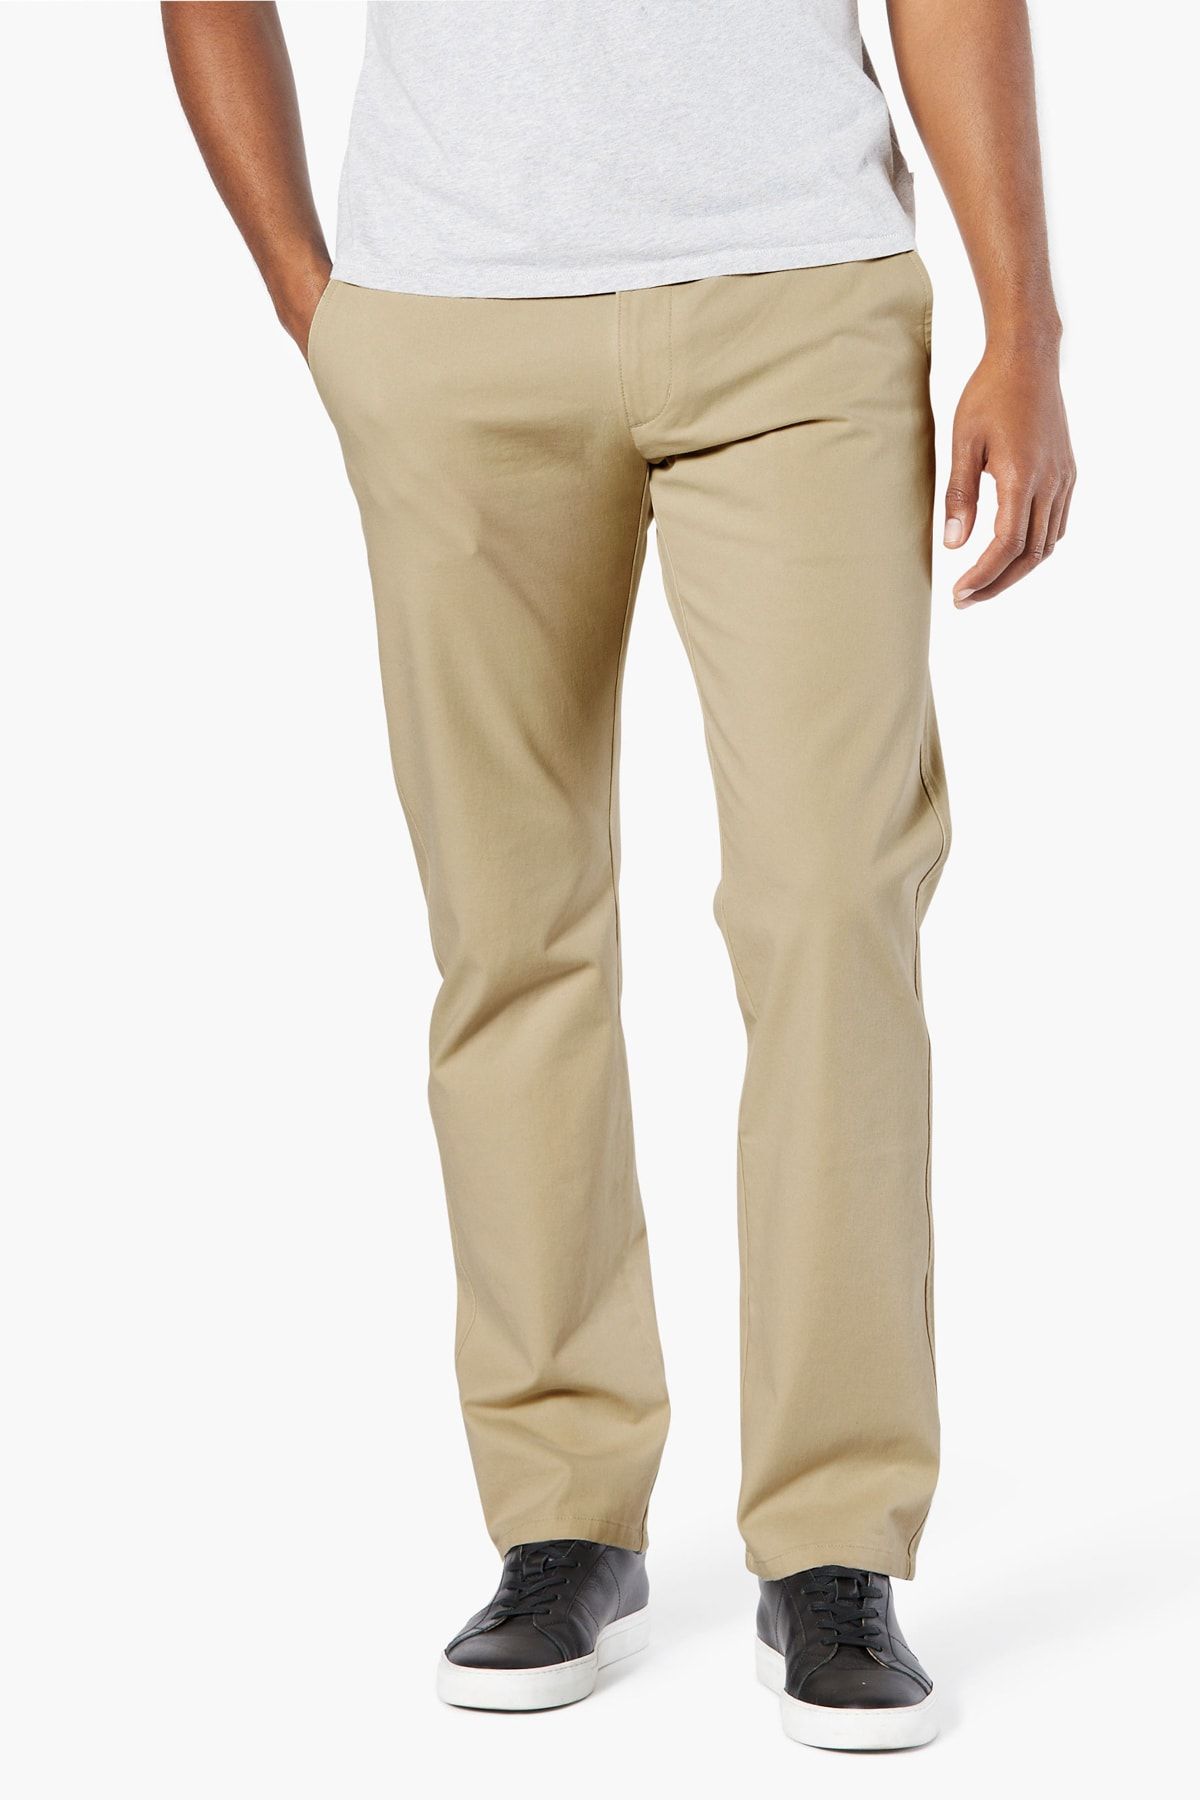 Dockers Ultimate Chino, Straight Fit